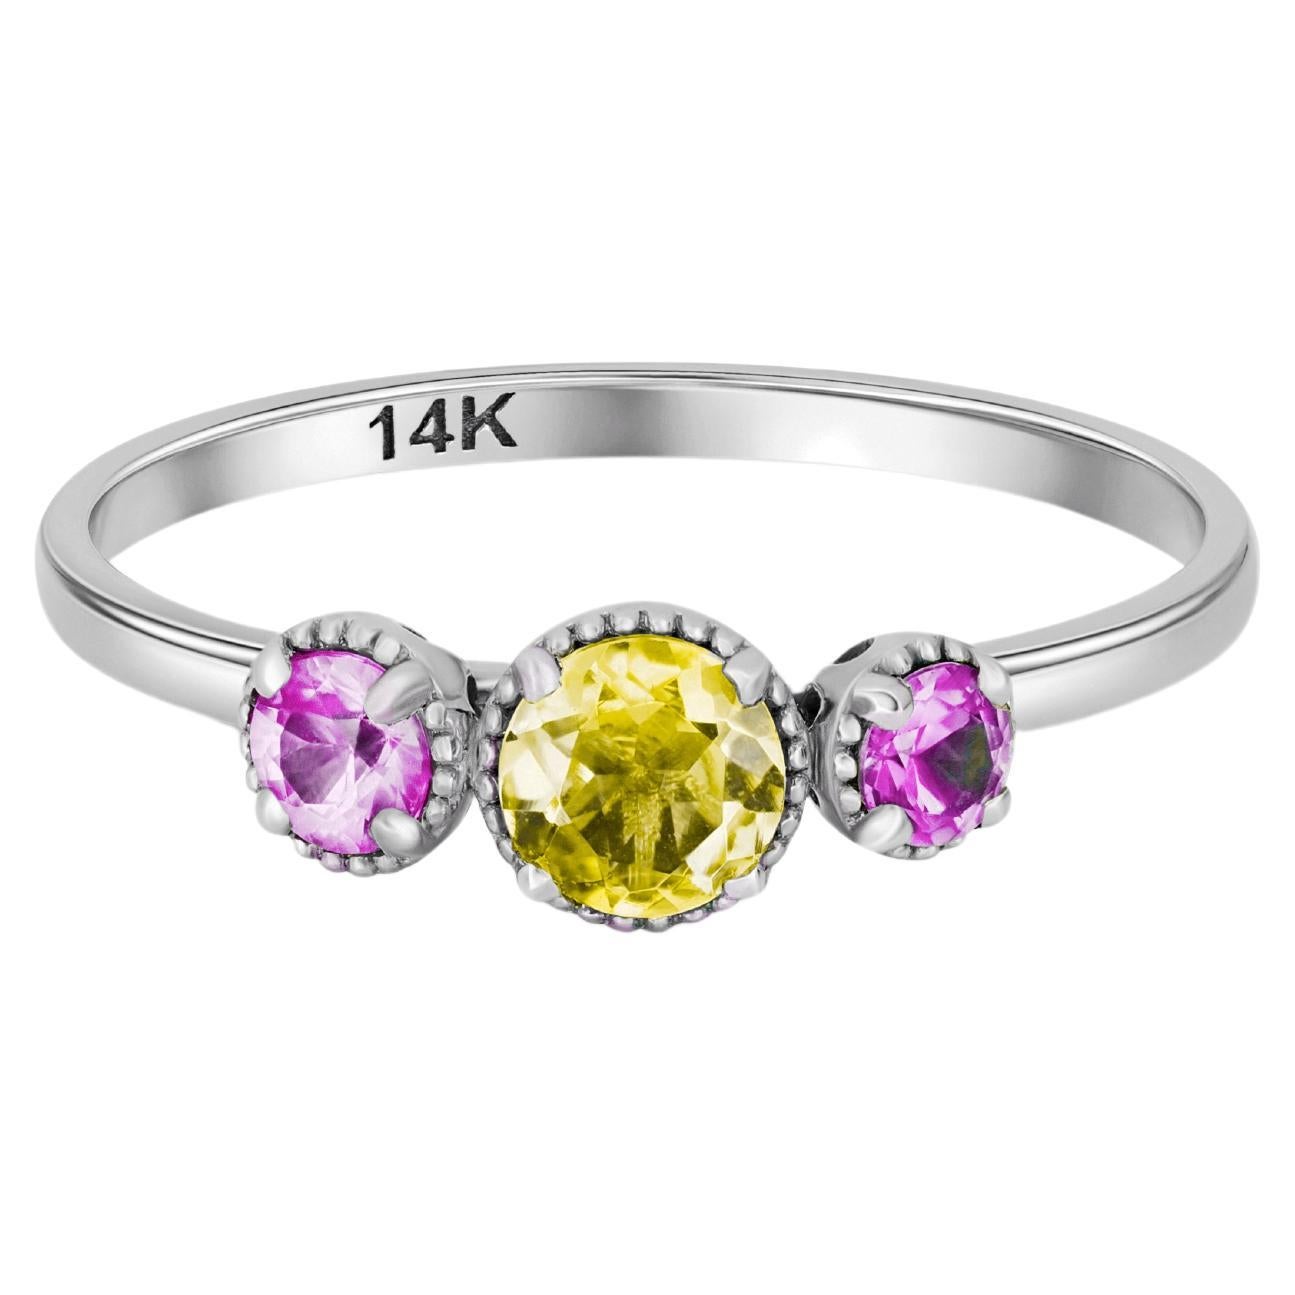 For Sale:  Trio gems 14k gold ring.